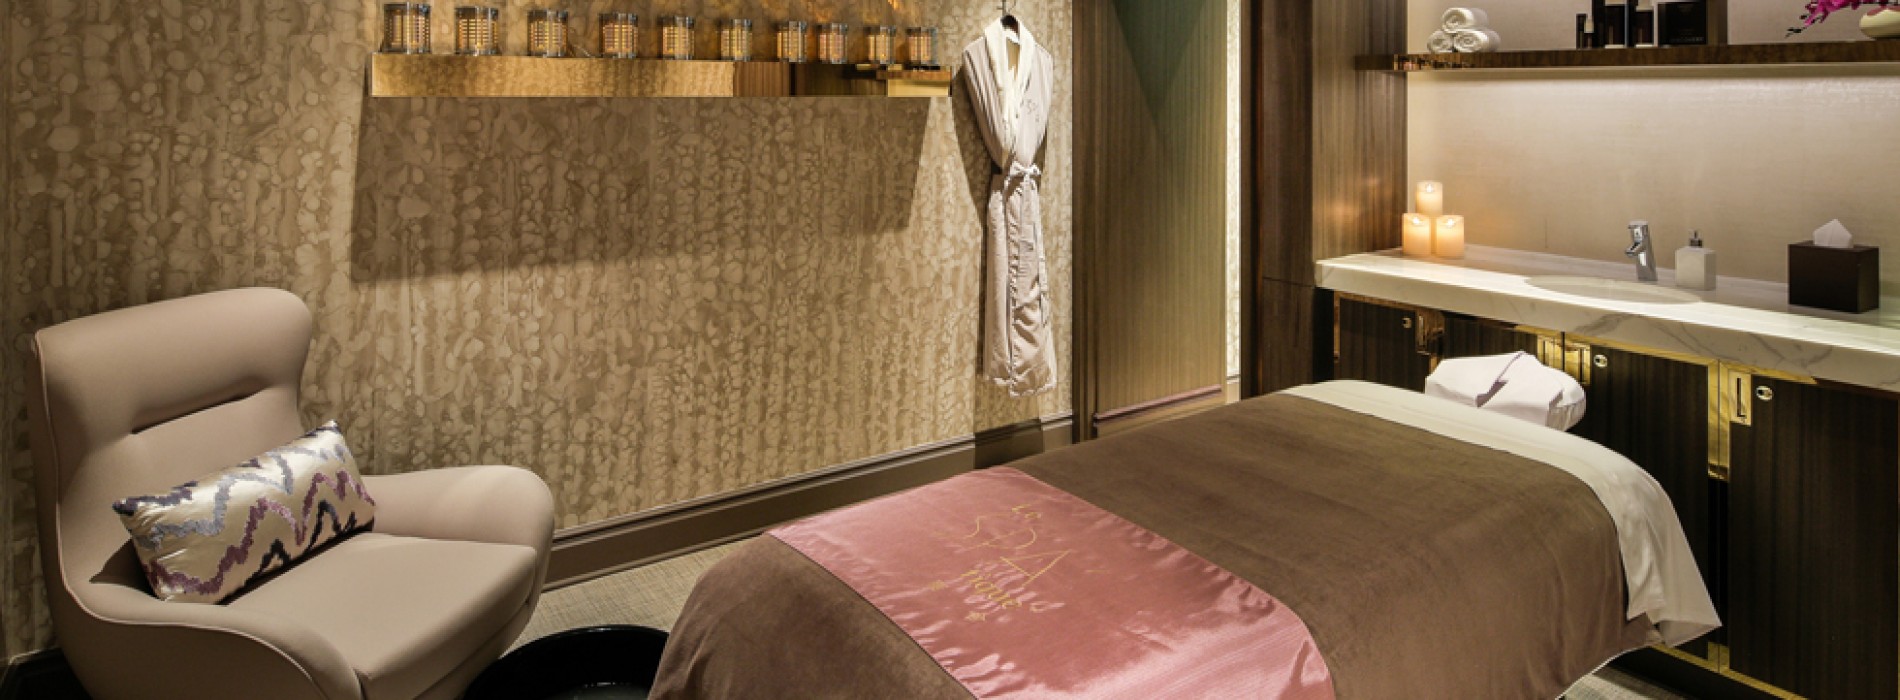 Le SPA’tique at The Parisian Macao Wins ‘Luxury Emerging Spa – China’ at 2017 World Luxury Spa Awards